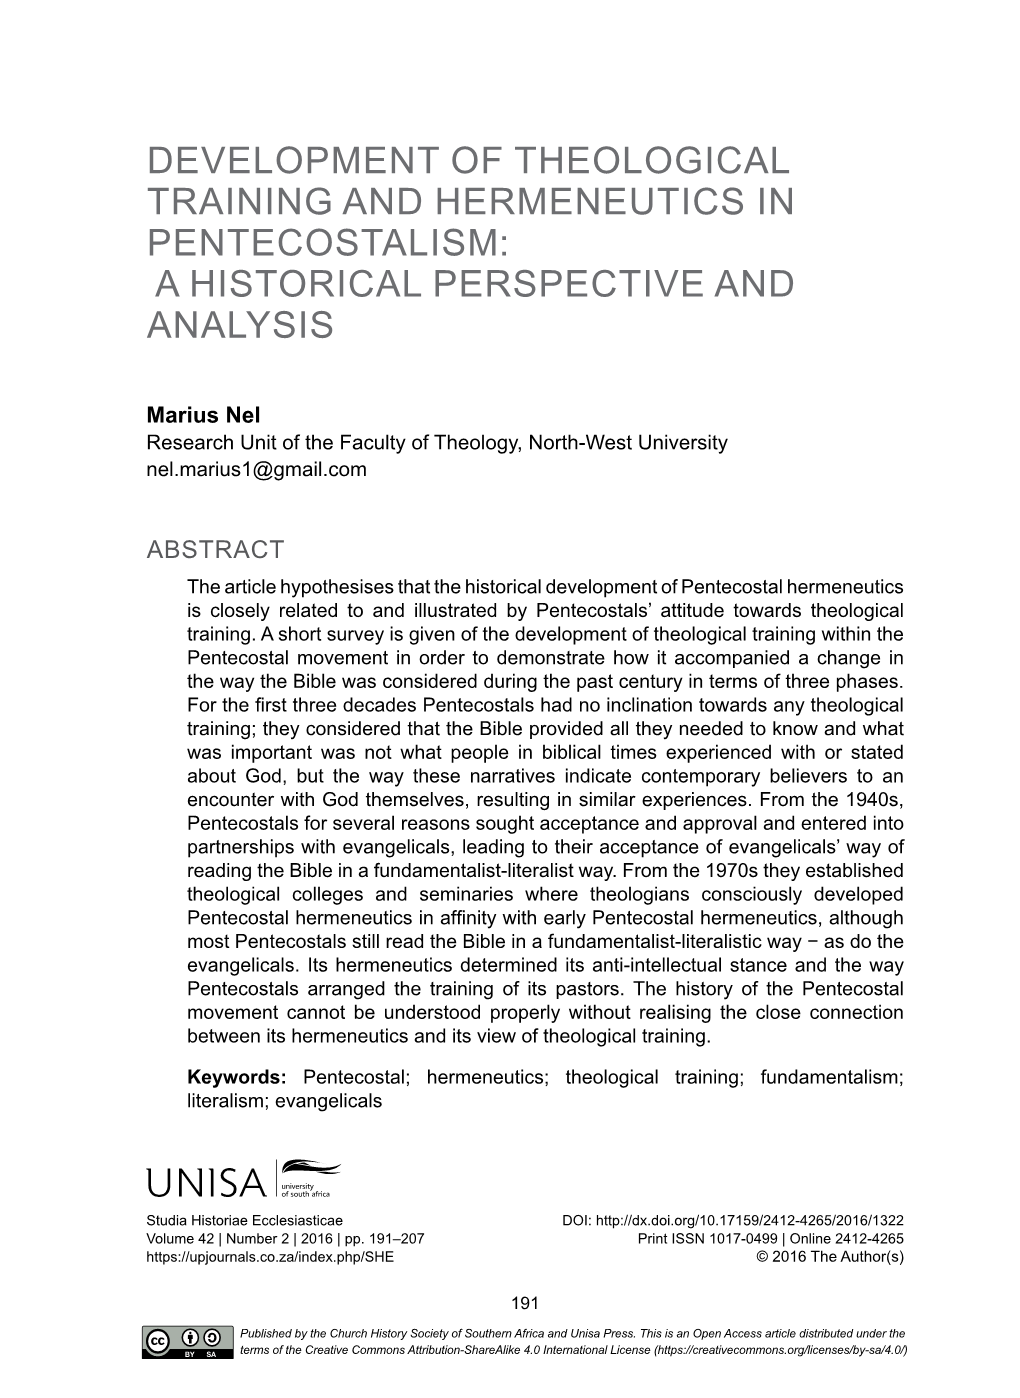 Development of Theological Training and Hermeneutics in Pentecostalism: a Historical Perspective and Analysis